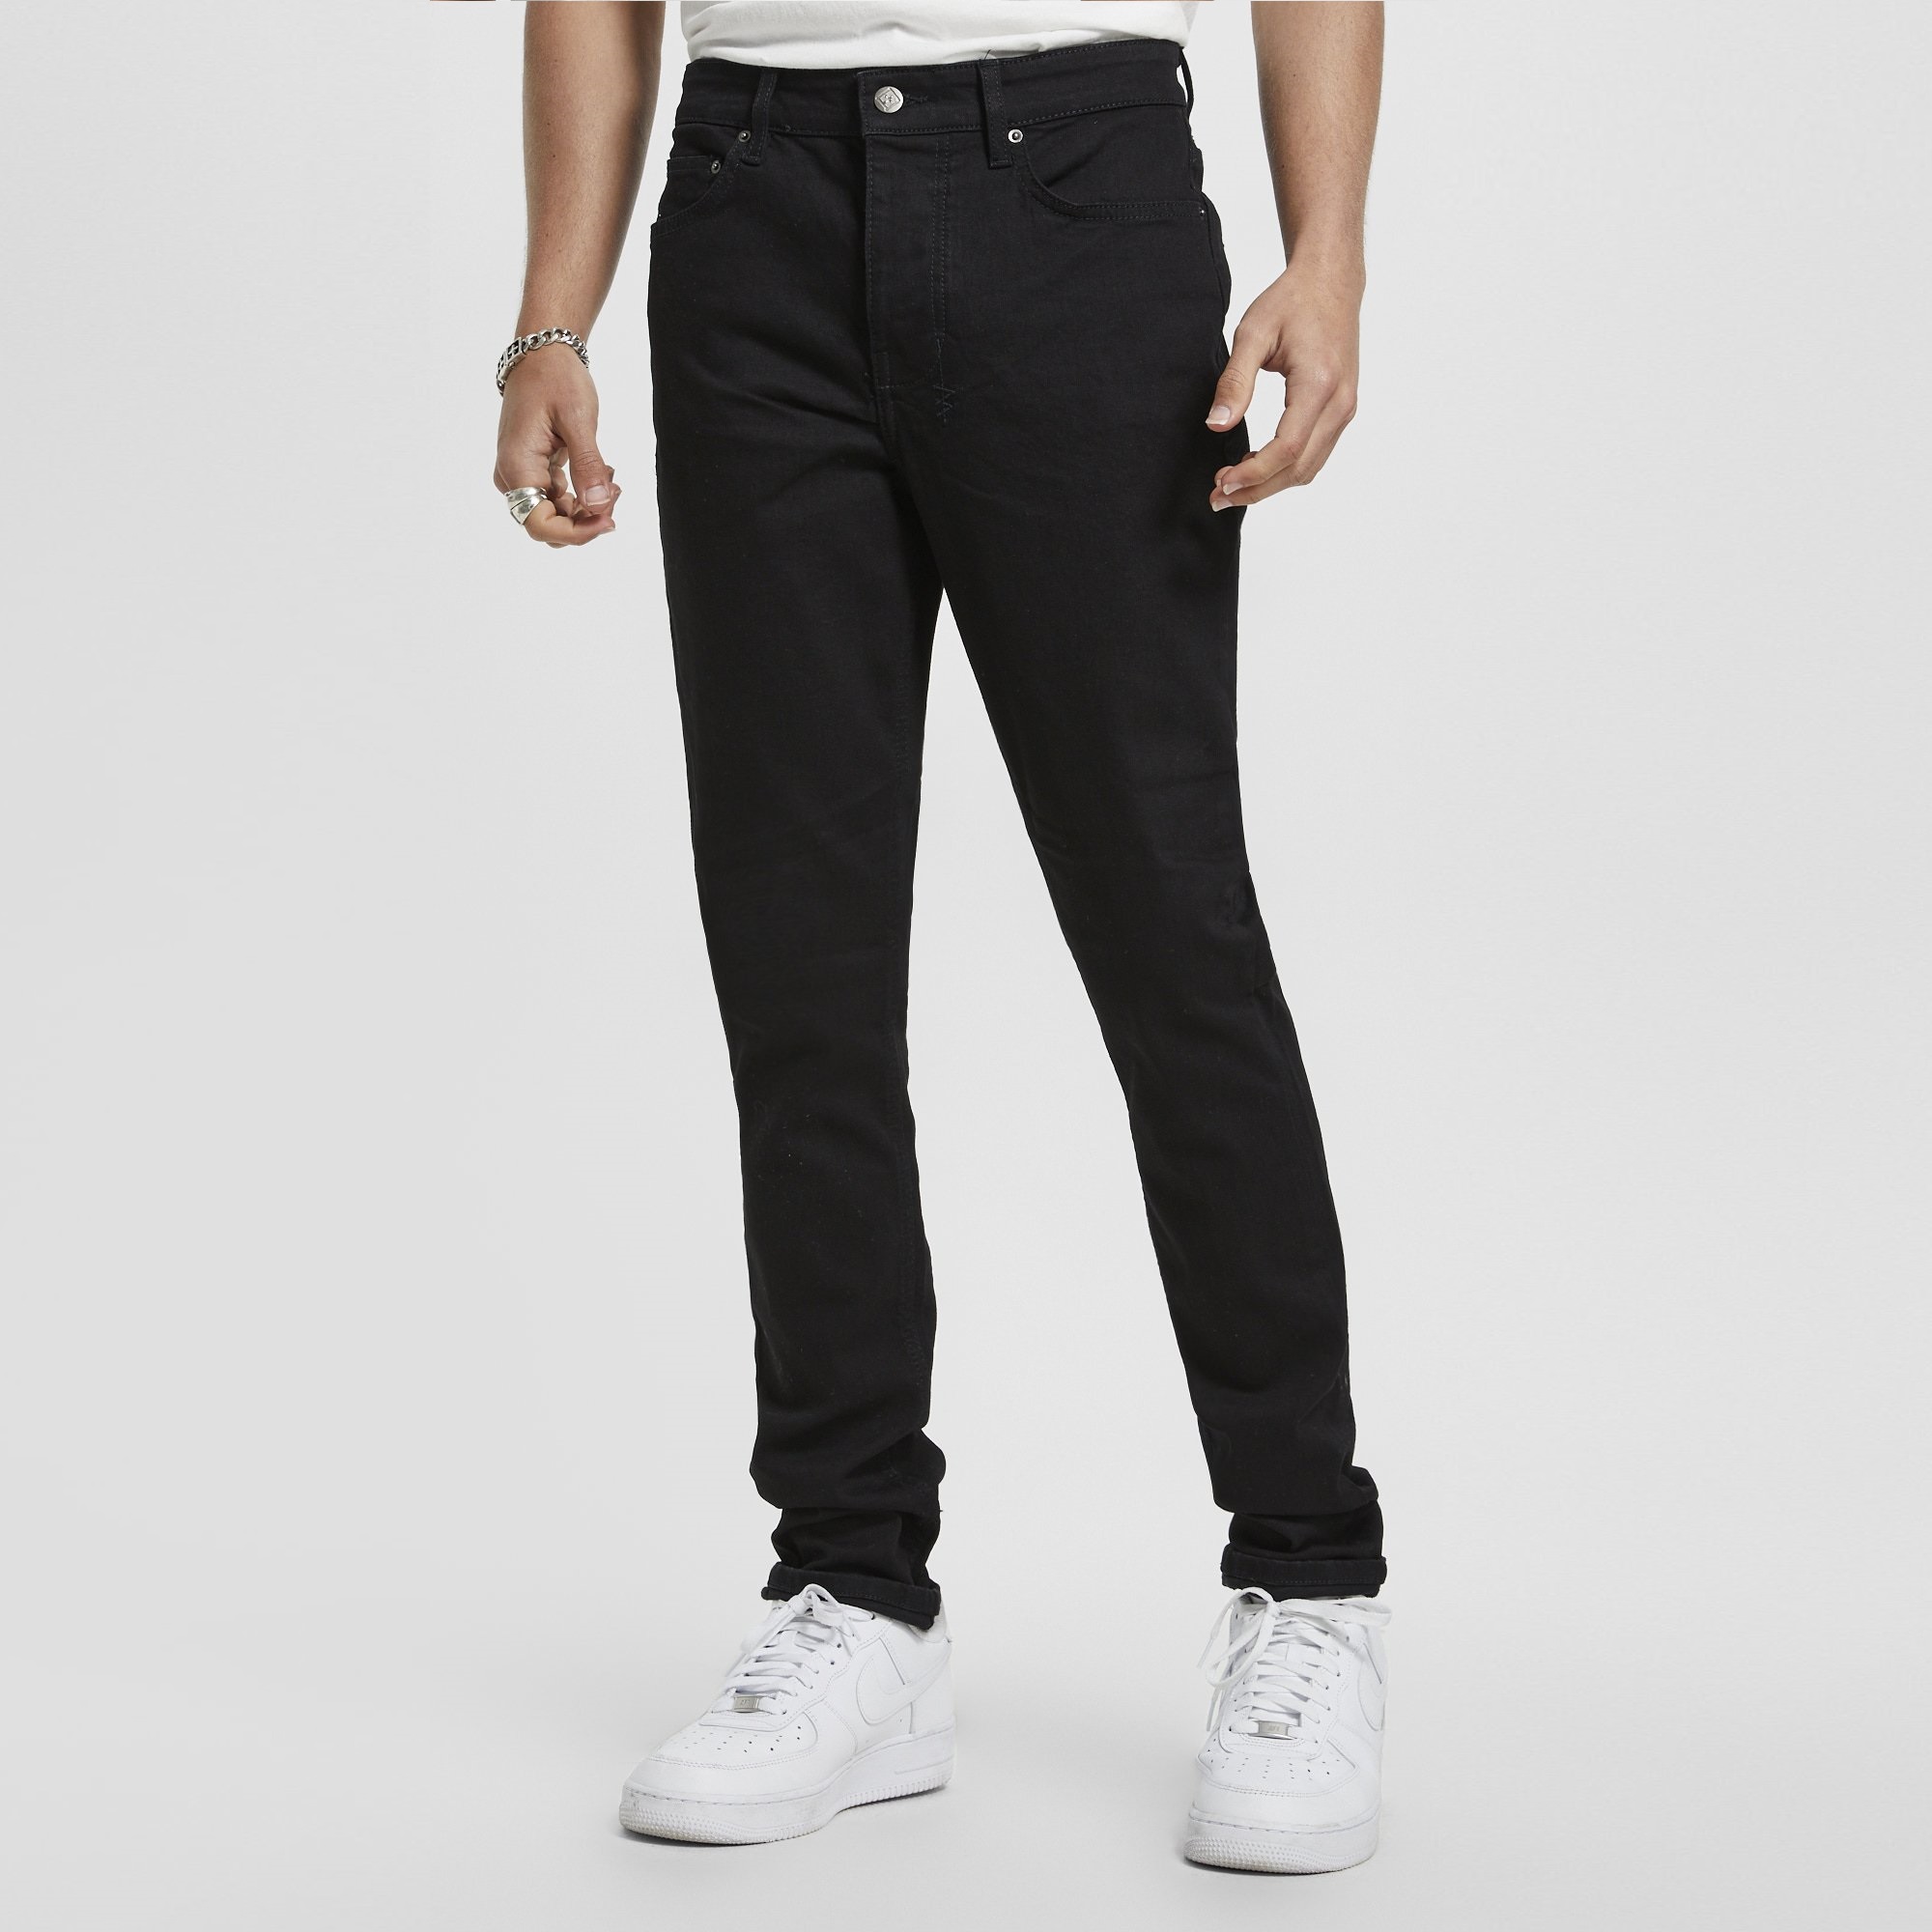 Ksubi Jeans Review - Must Read This Before Buying